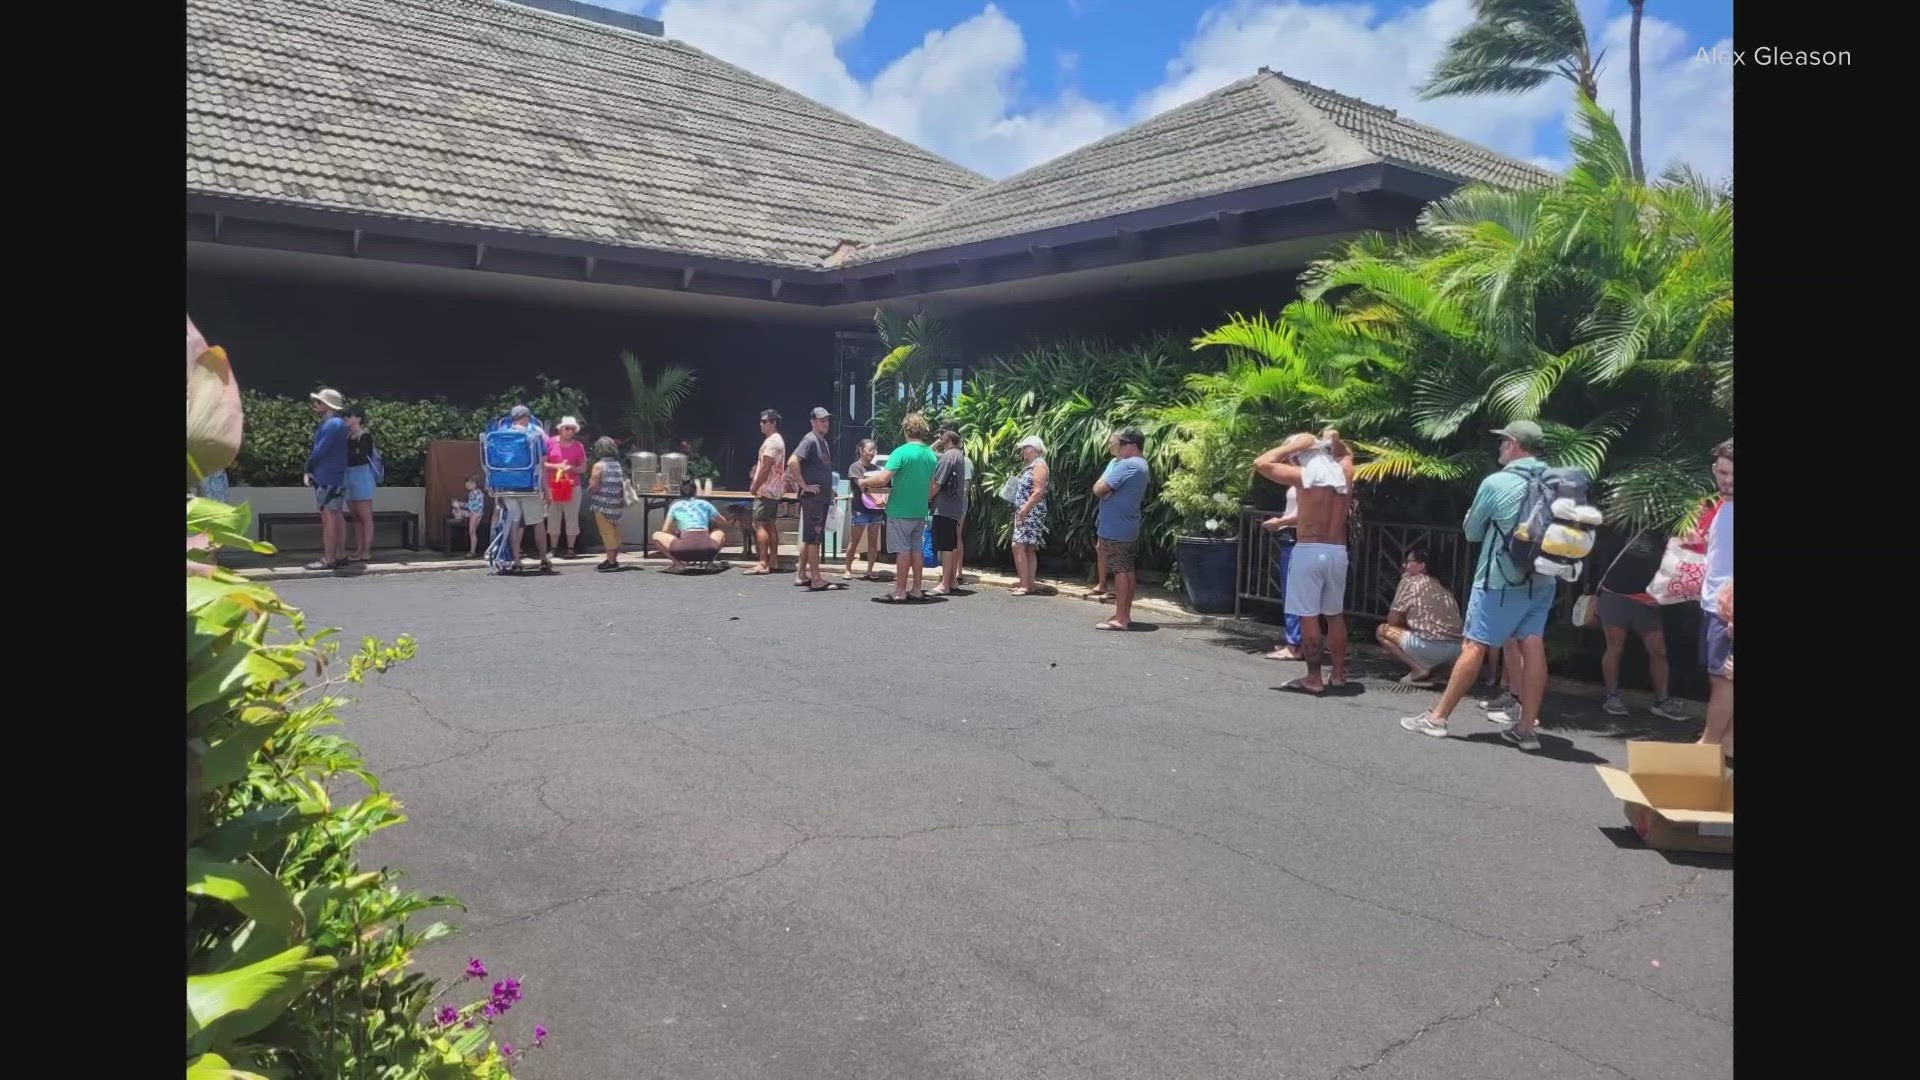 Alex Gleason estimated that he and his staff at Merriman's Kapalua have served about 5,555 free meals to displaced locals in the last six days.